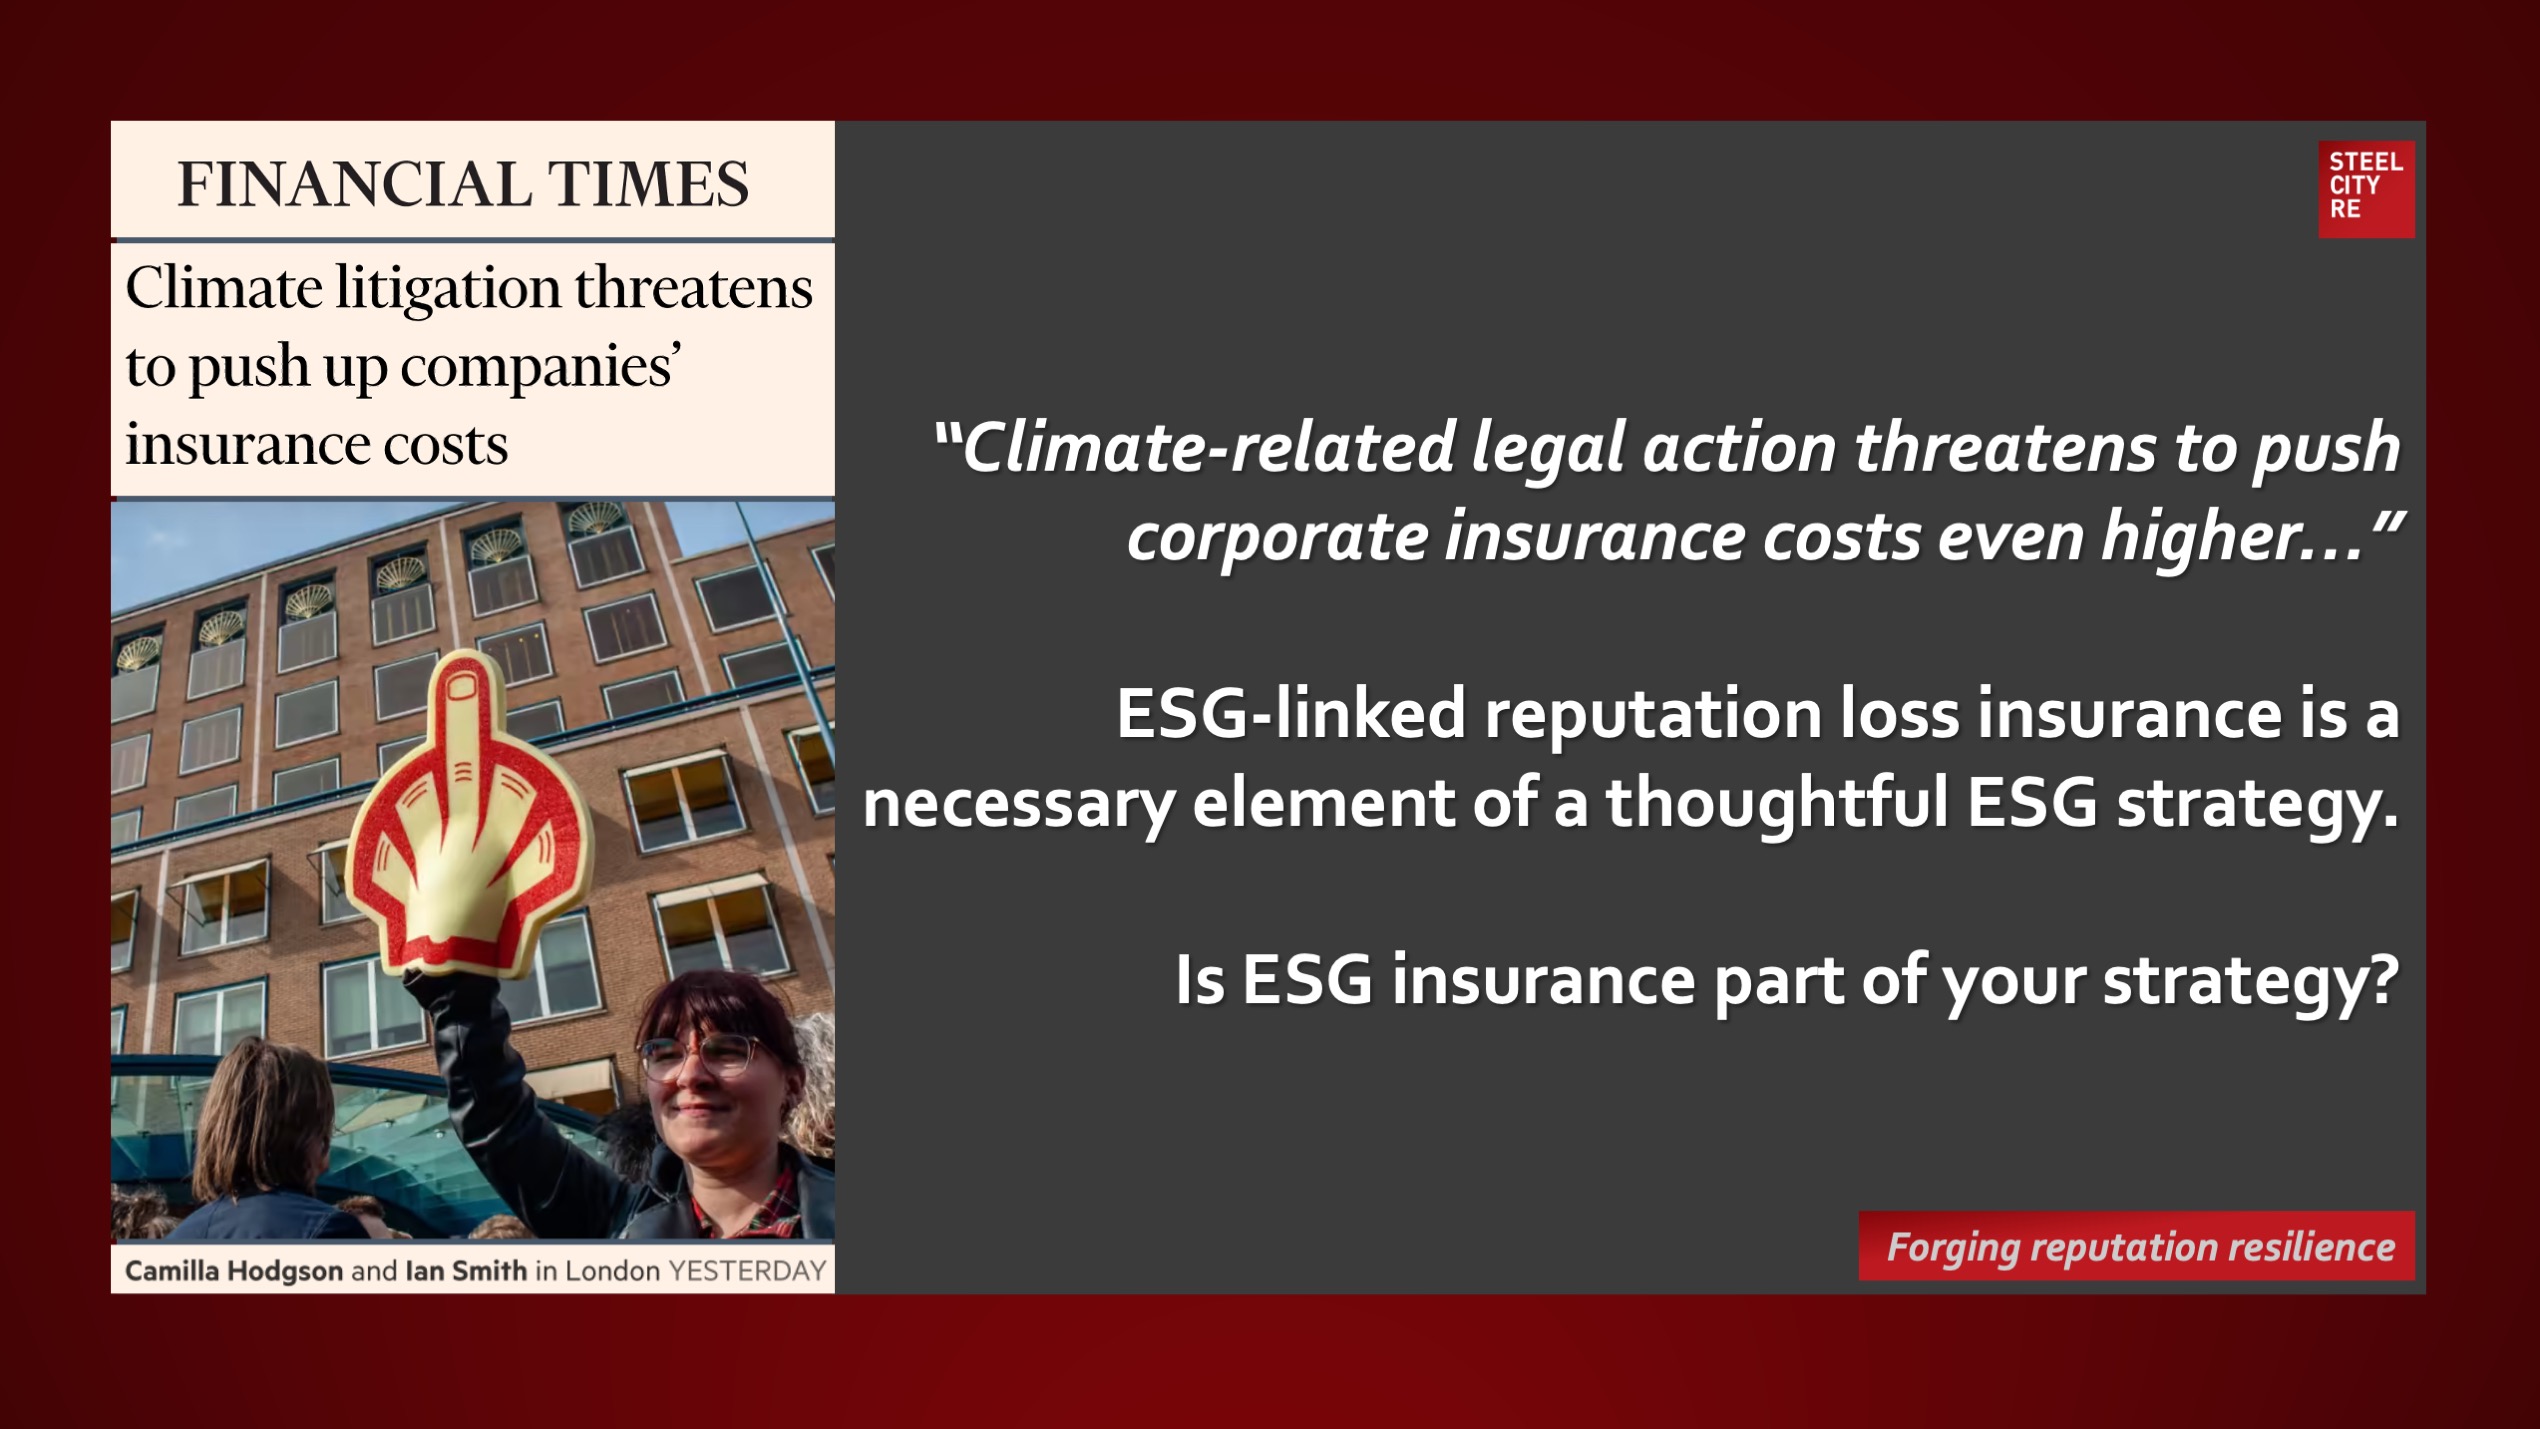 ESG D&O Underwriters: ESG-linked reputation loss insurance from Steel City Re is a necessary element of a thoughtful ESG strategy.